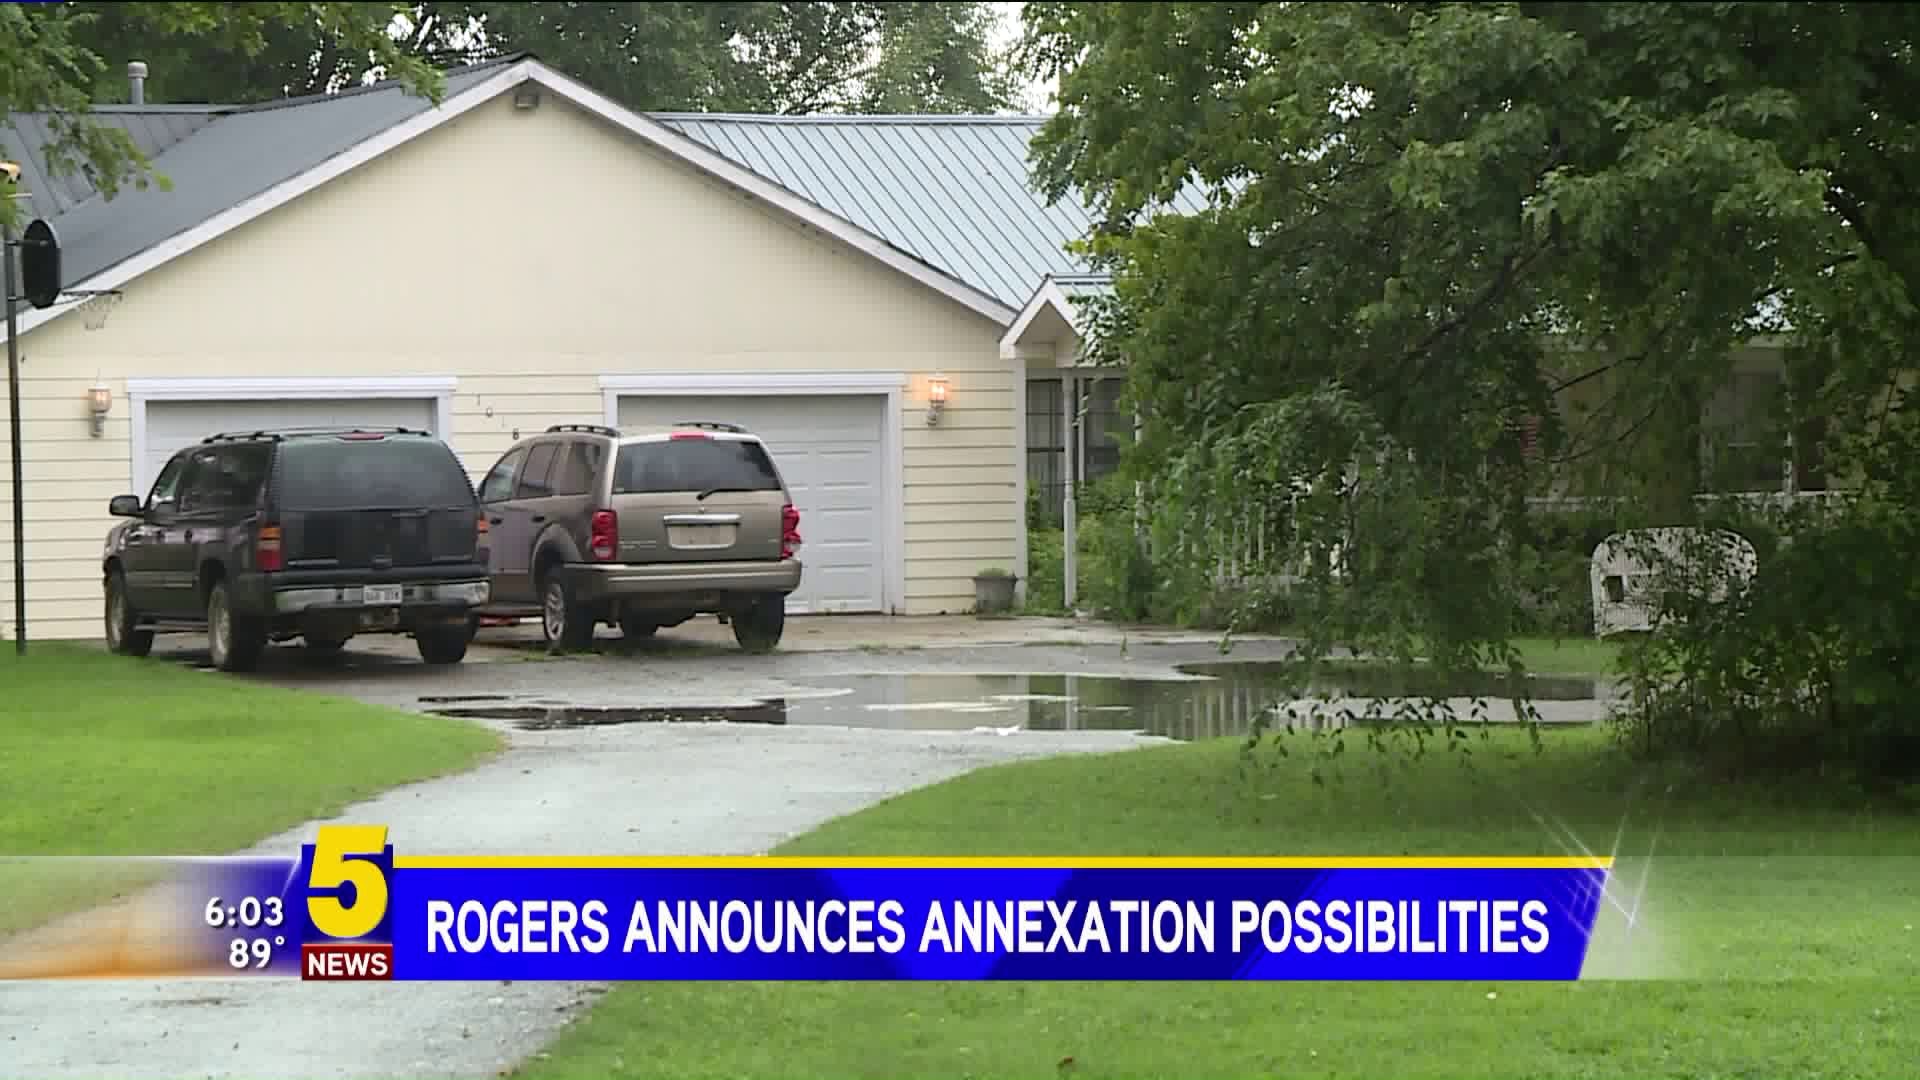 Rogers Announces Annexation Possibilities